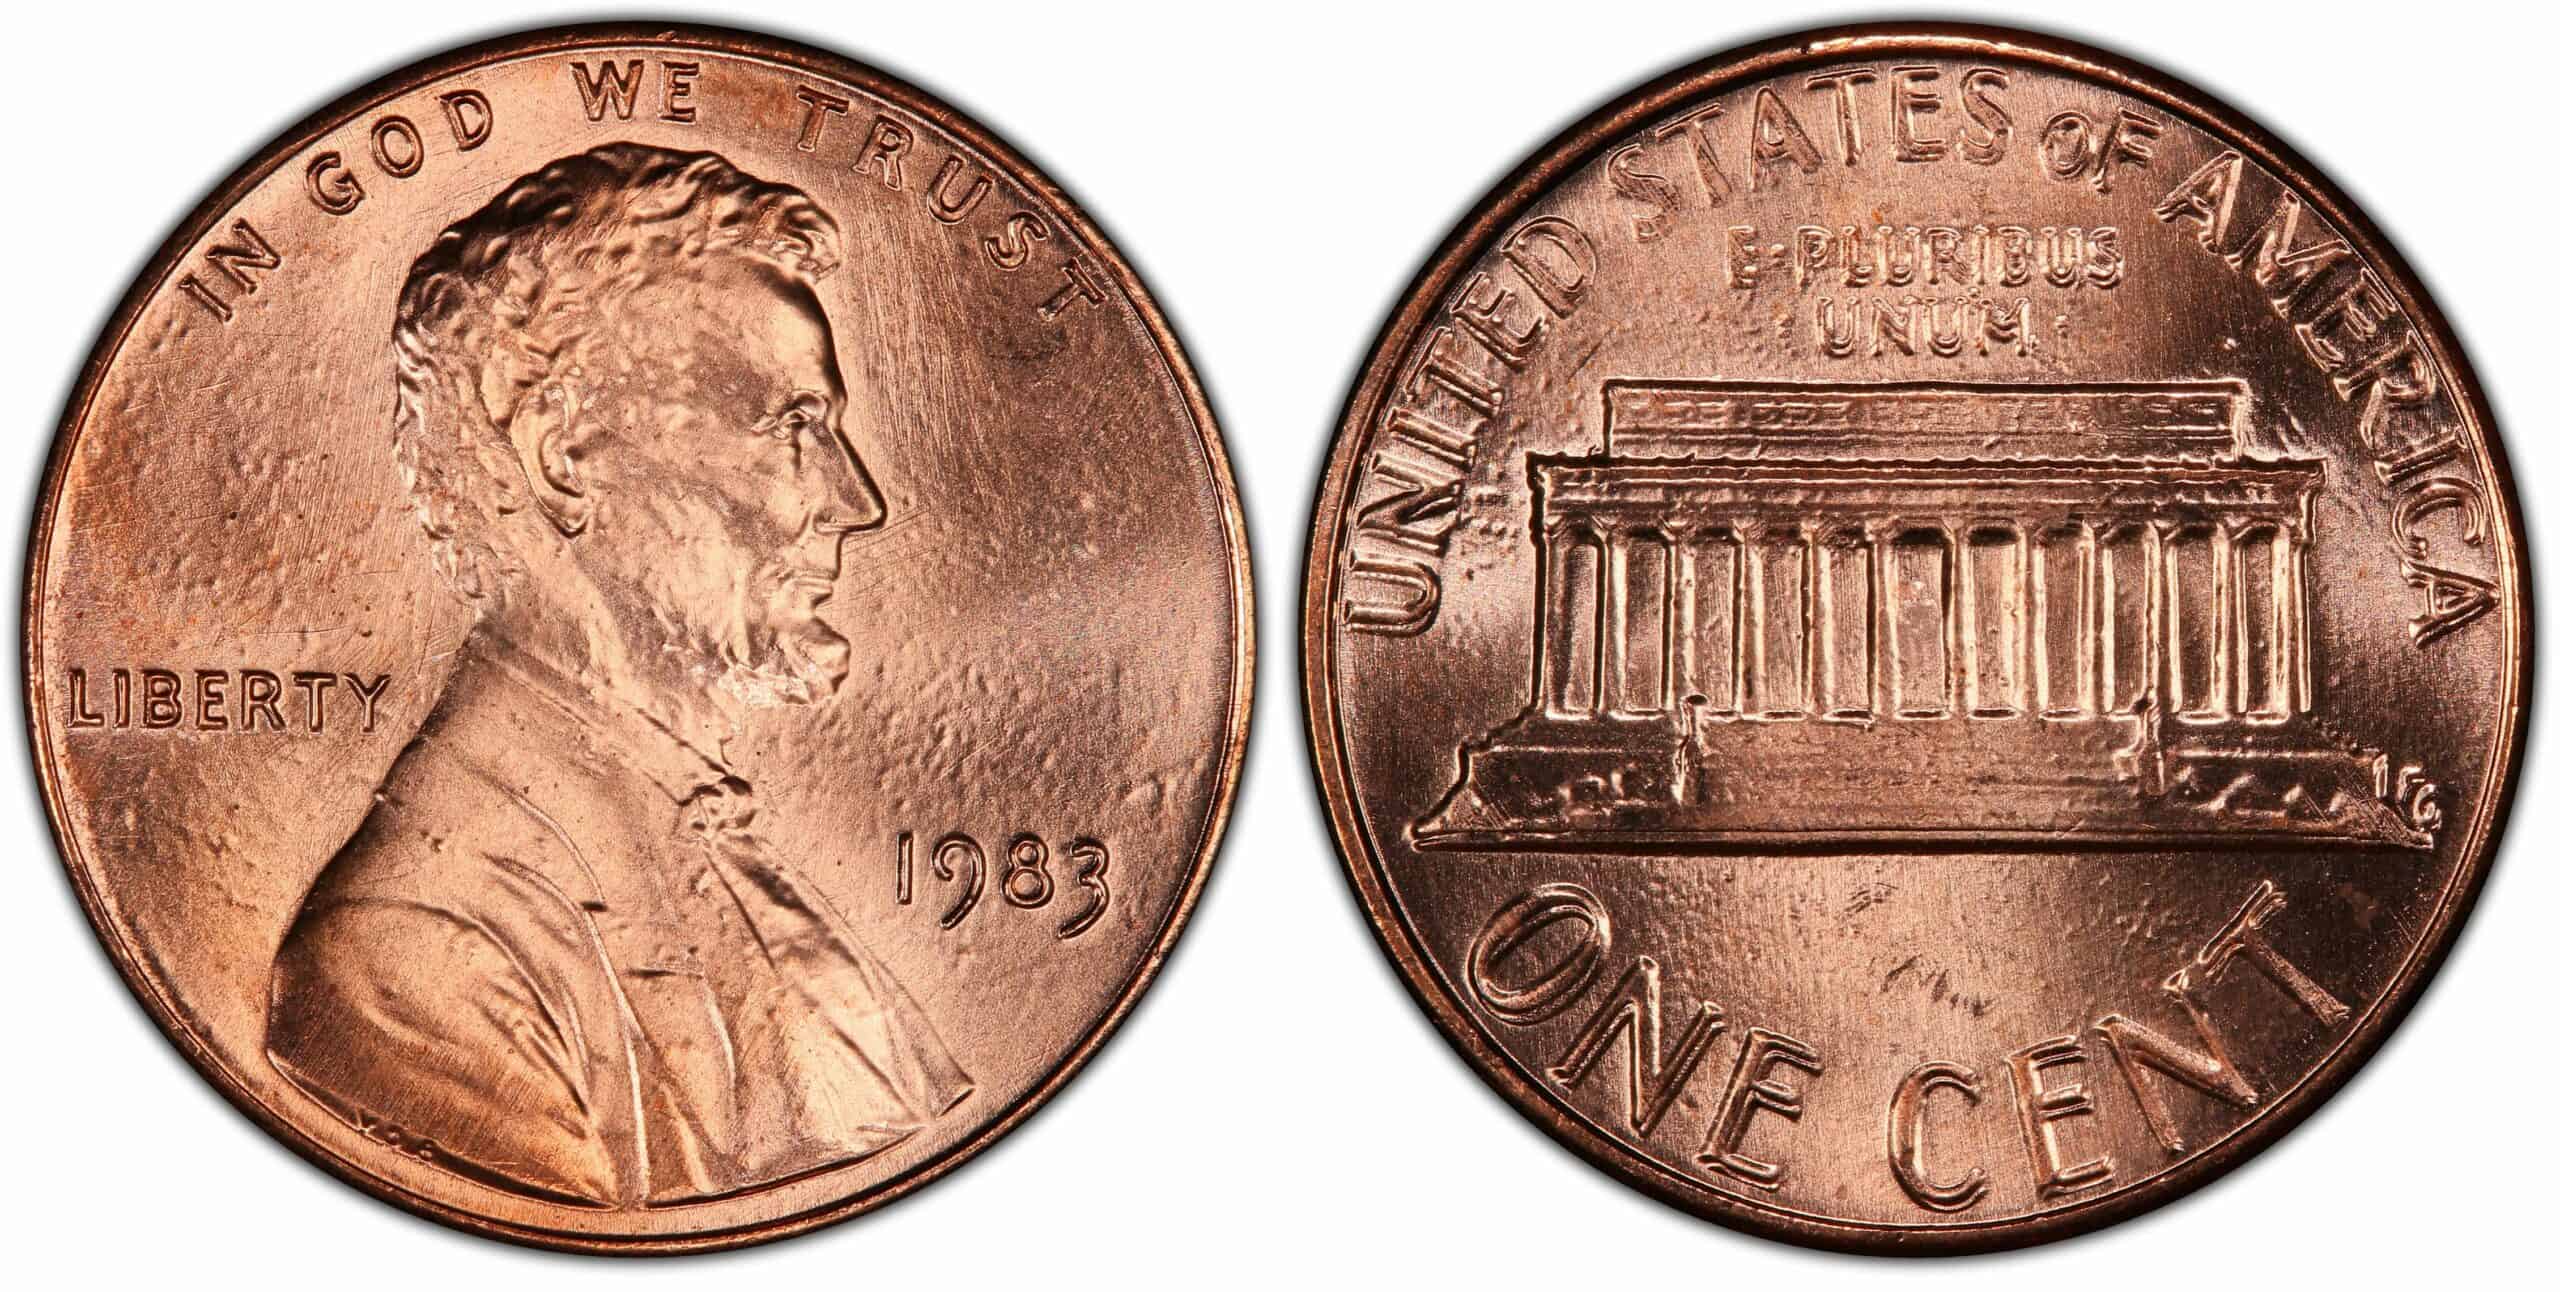 1983 Penny Value Guides (Errors, “D”, “S” and No Mint Mark)